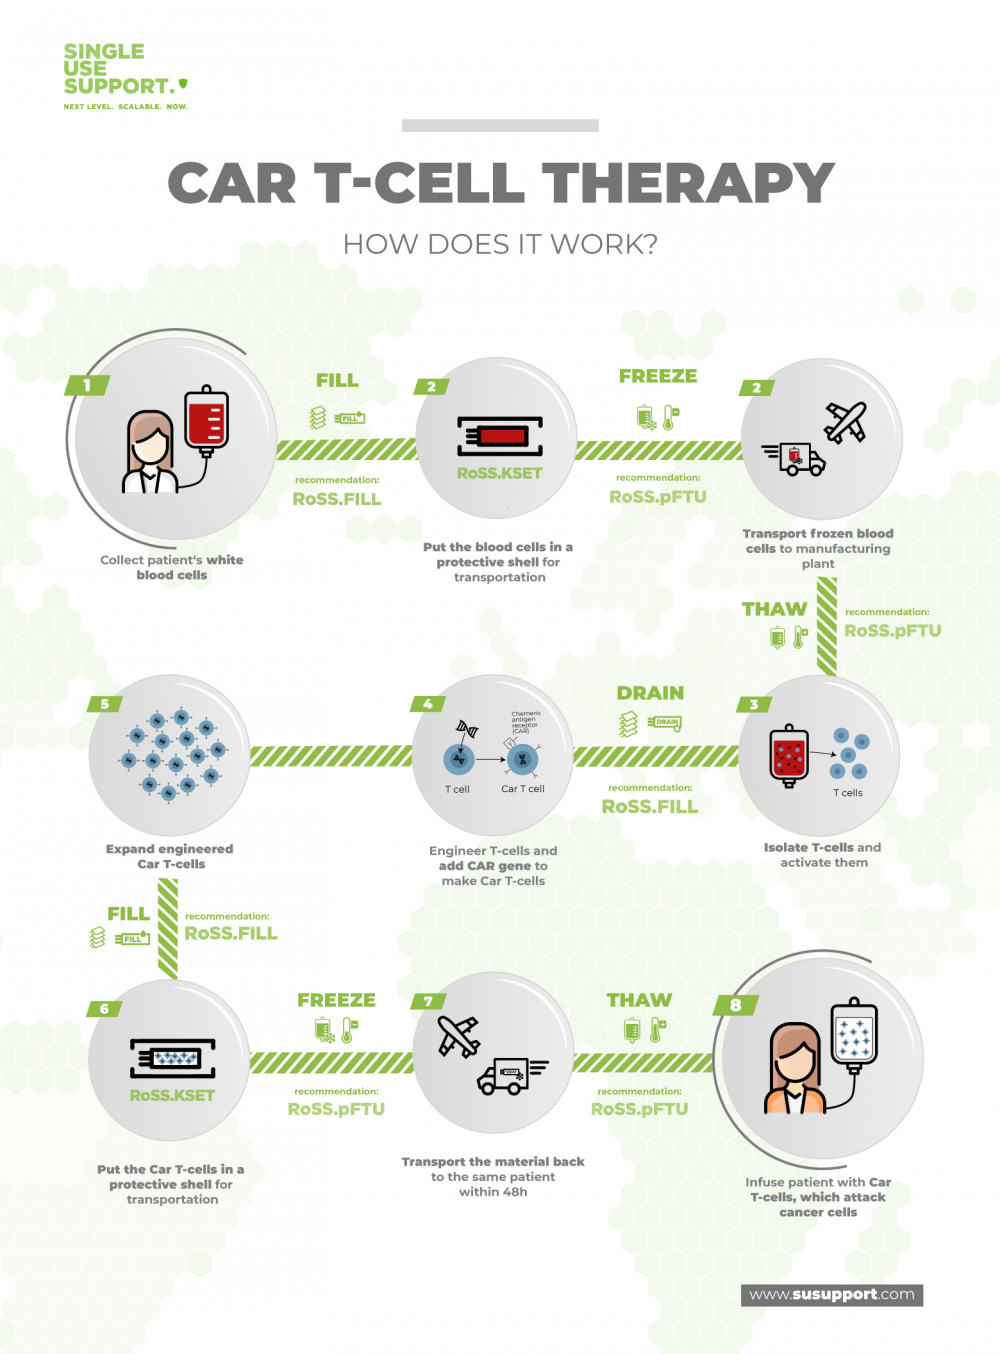 Car t-cell therapy - How does it work?